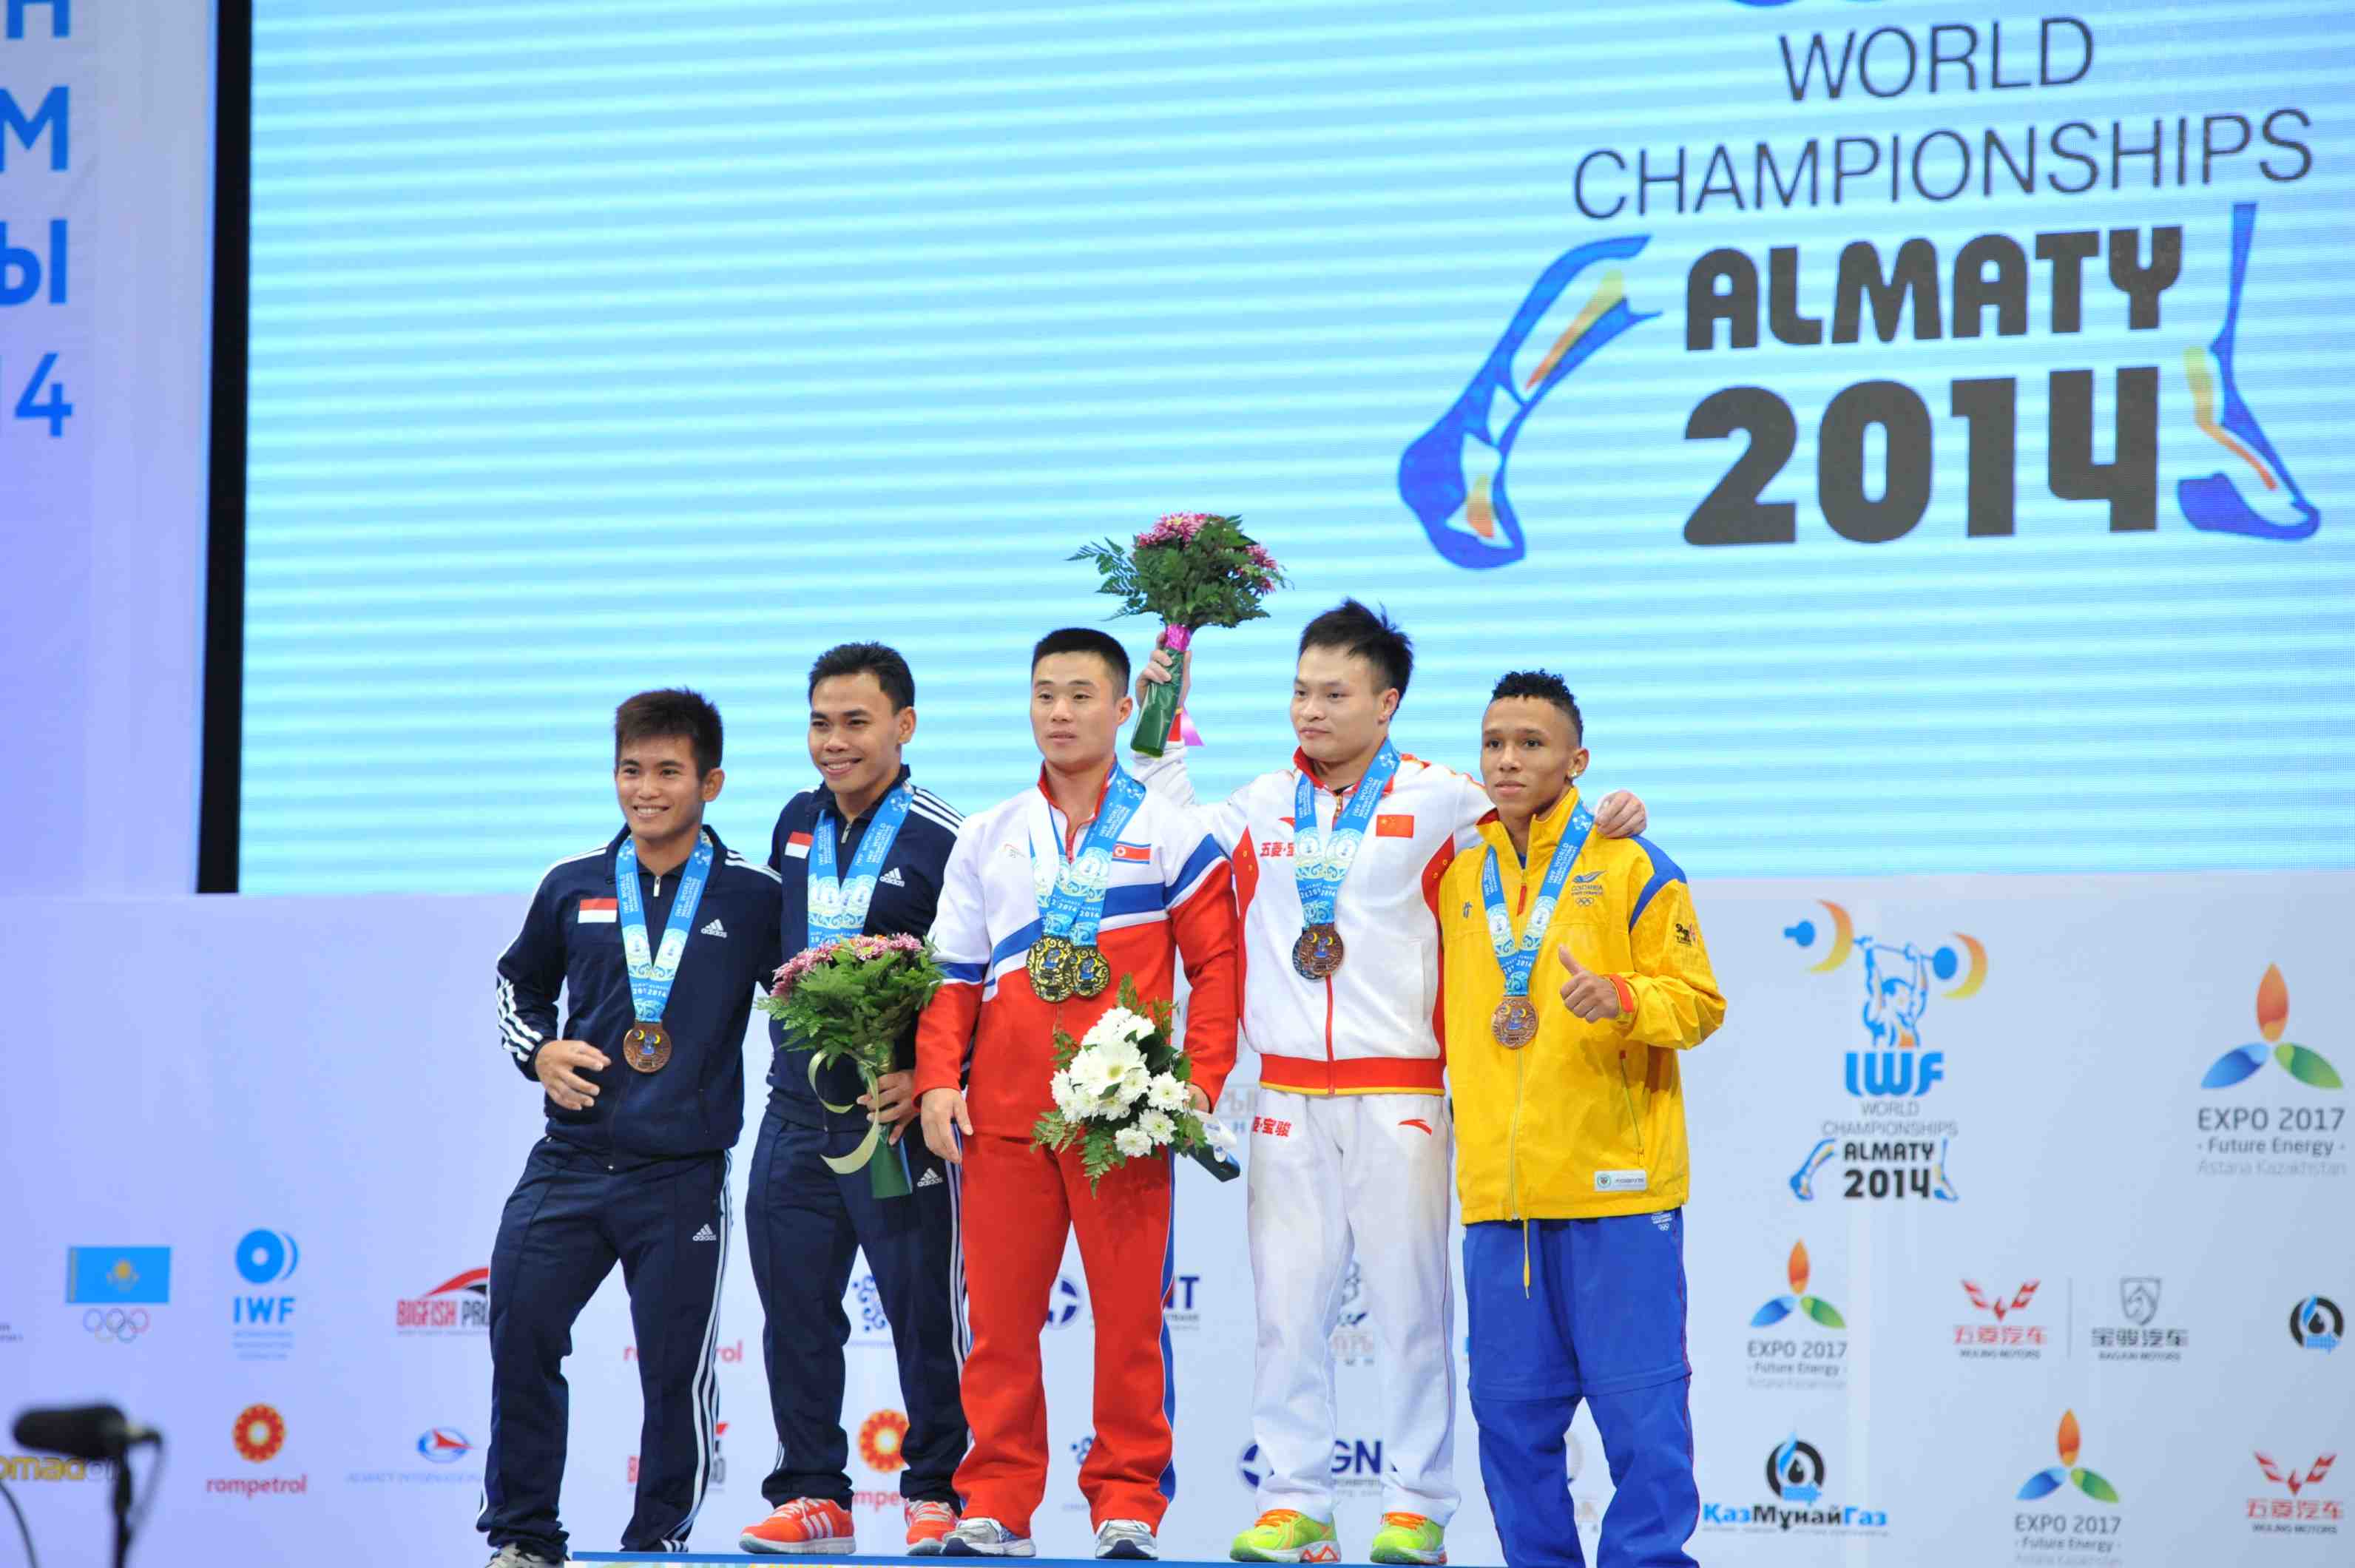 Kim Un Guk totalled 325kg to take the overall gold ©Almaty 2014 